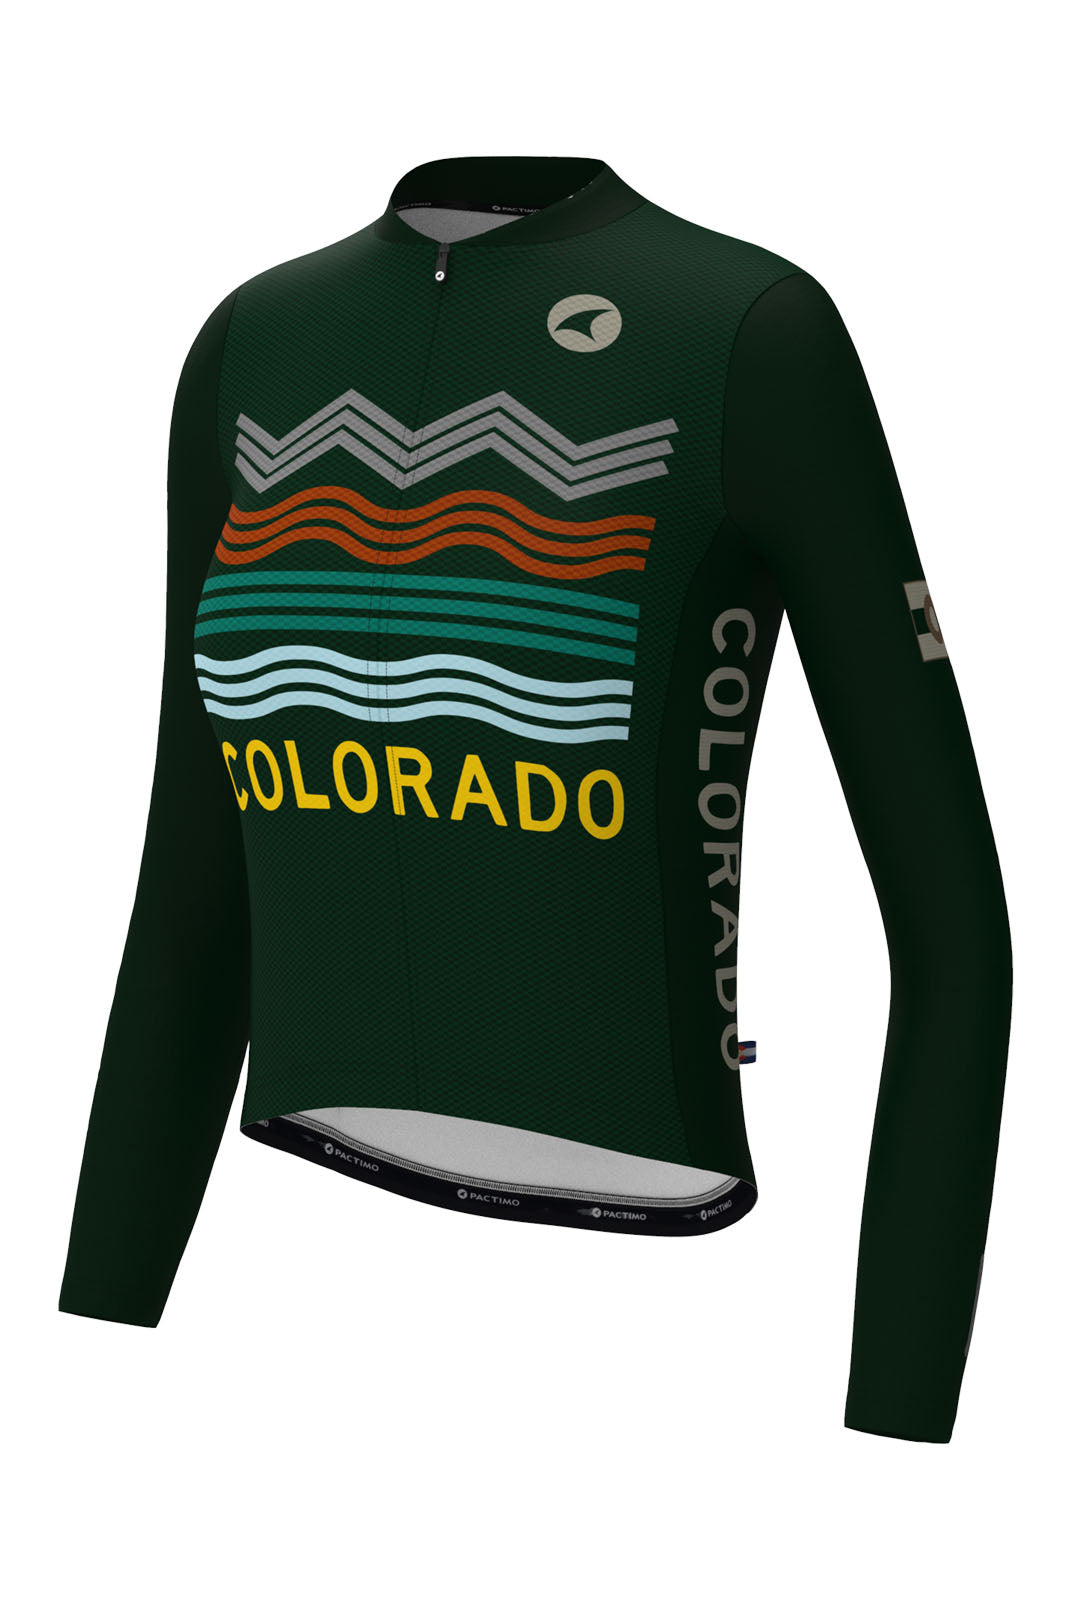 Women's Navy Blue Colorado Long Sleeve Cycling Jersey - Ascent Aero Front View